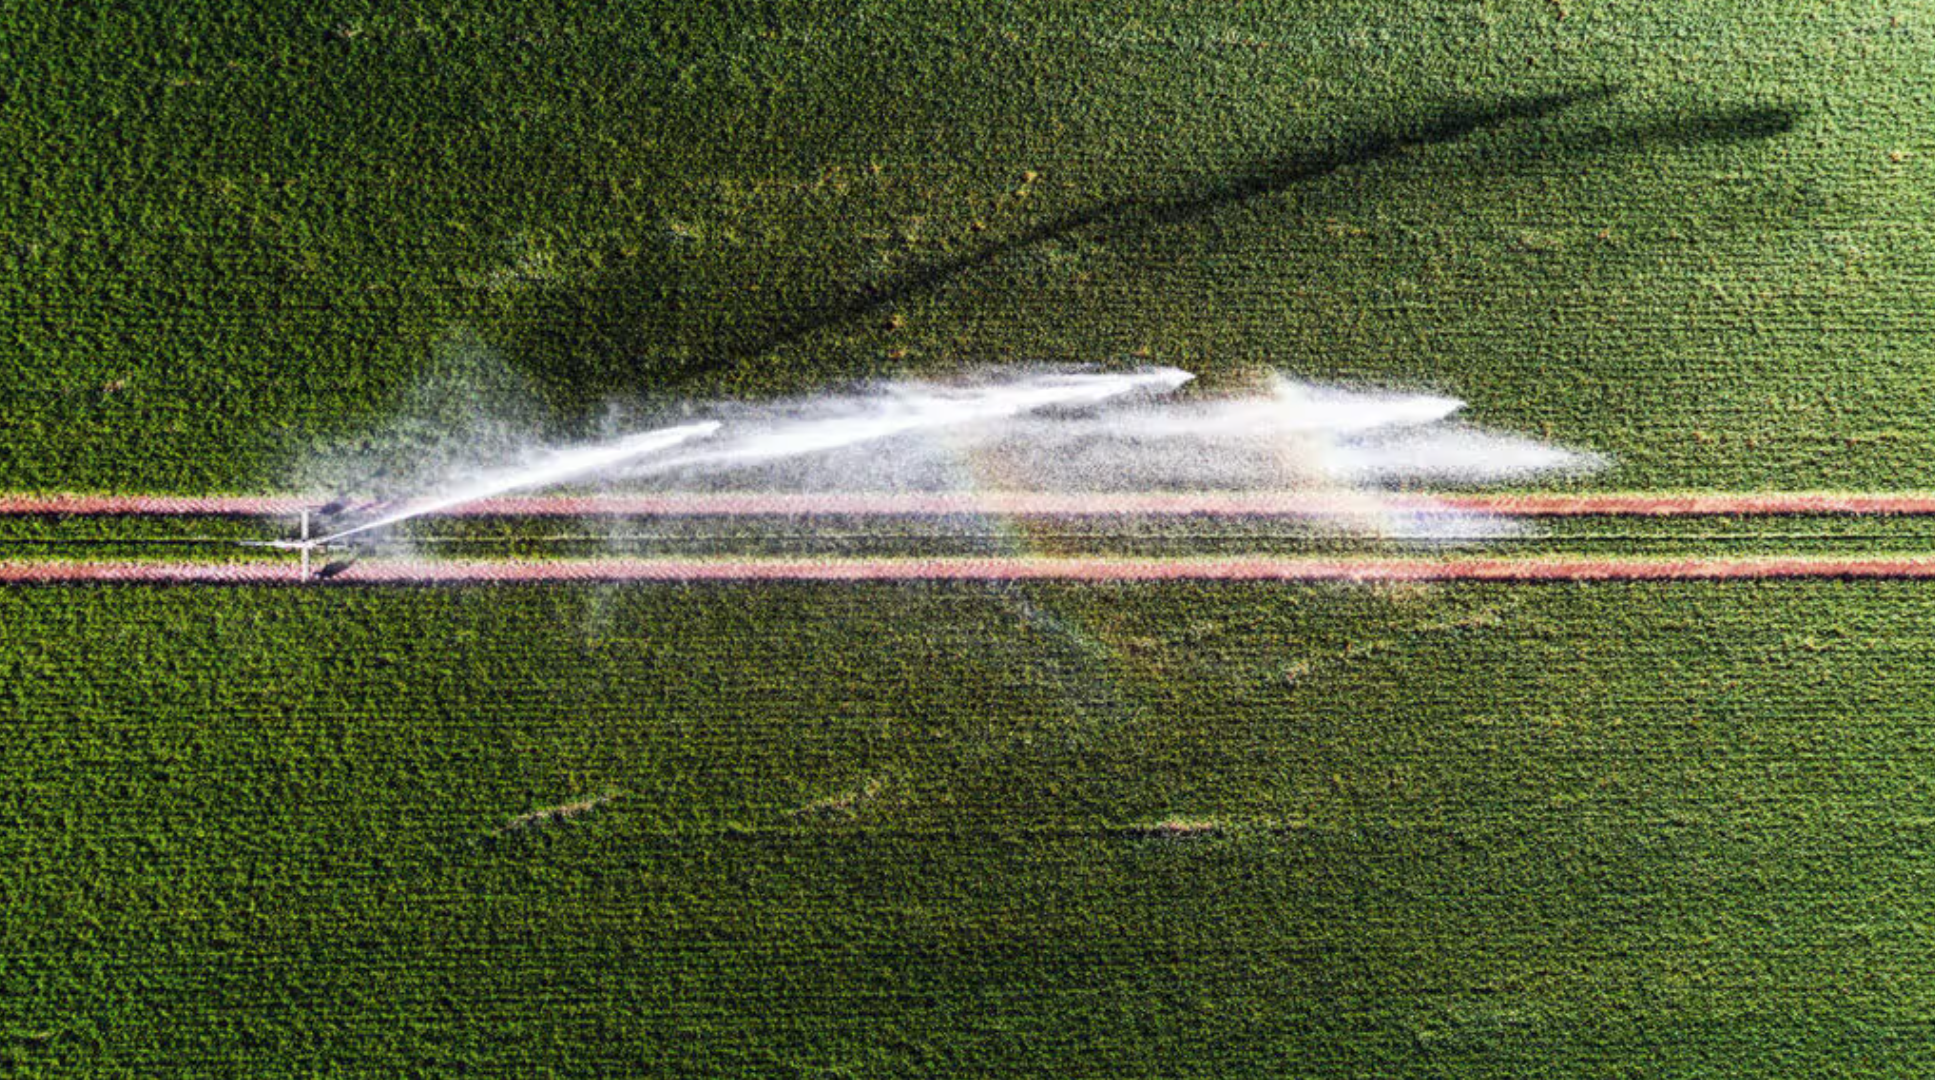 Another 3 common pesticides are now linked to Parkinson’s disease risk